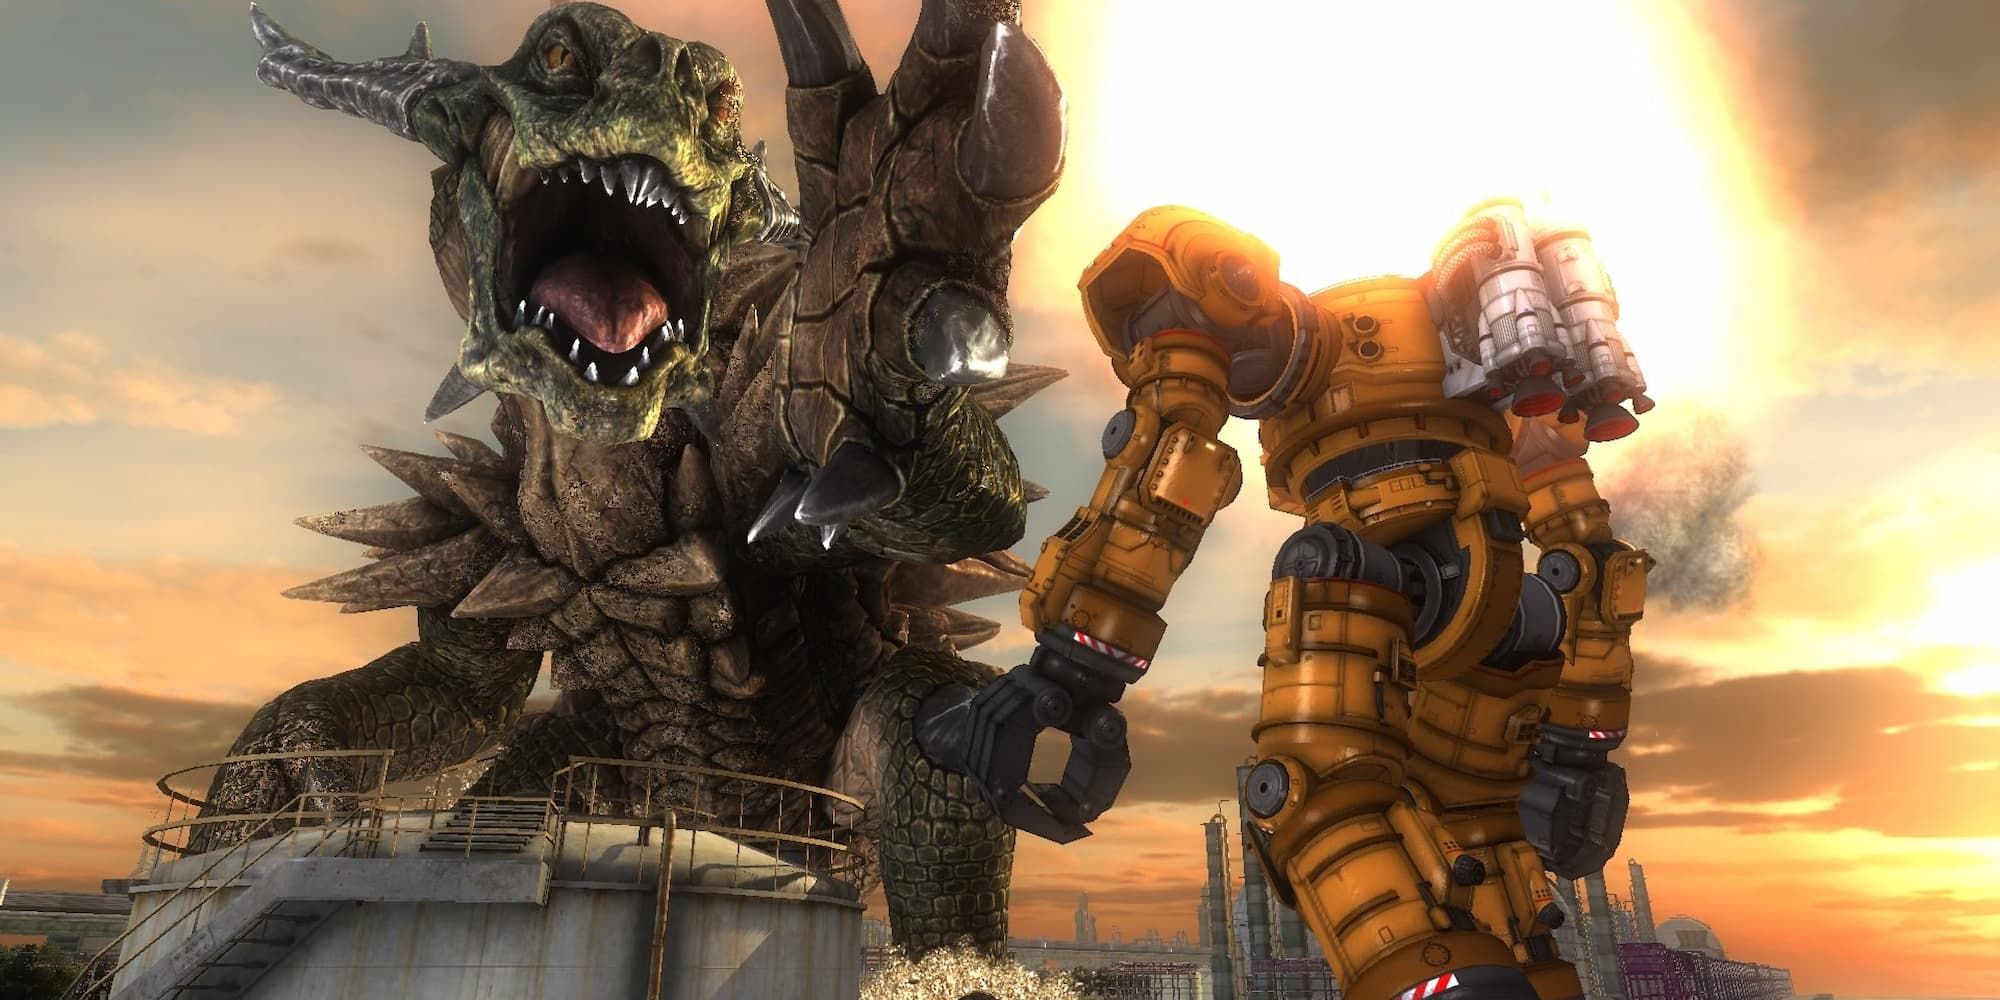 A soldier pilots a mech to take on a massive hostile lizard in Earth Defense Force 5.